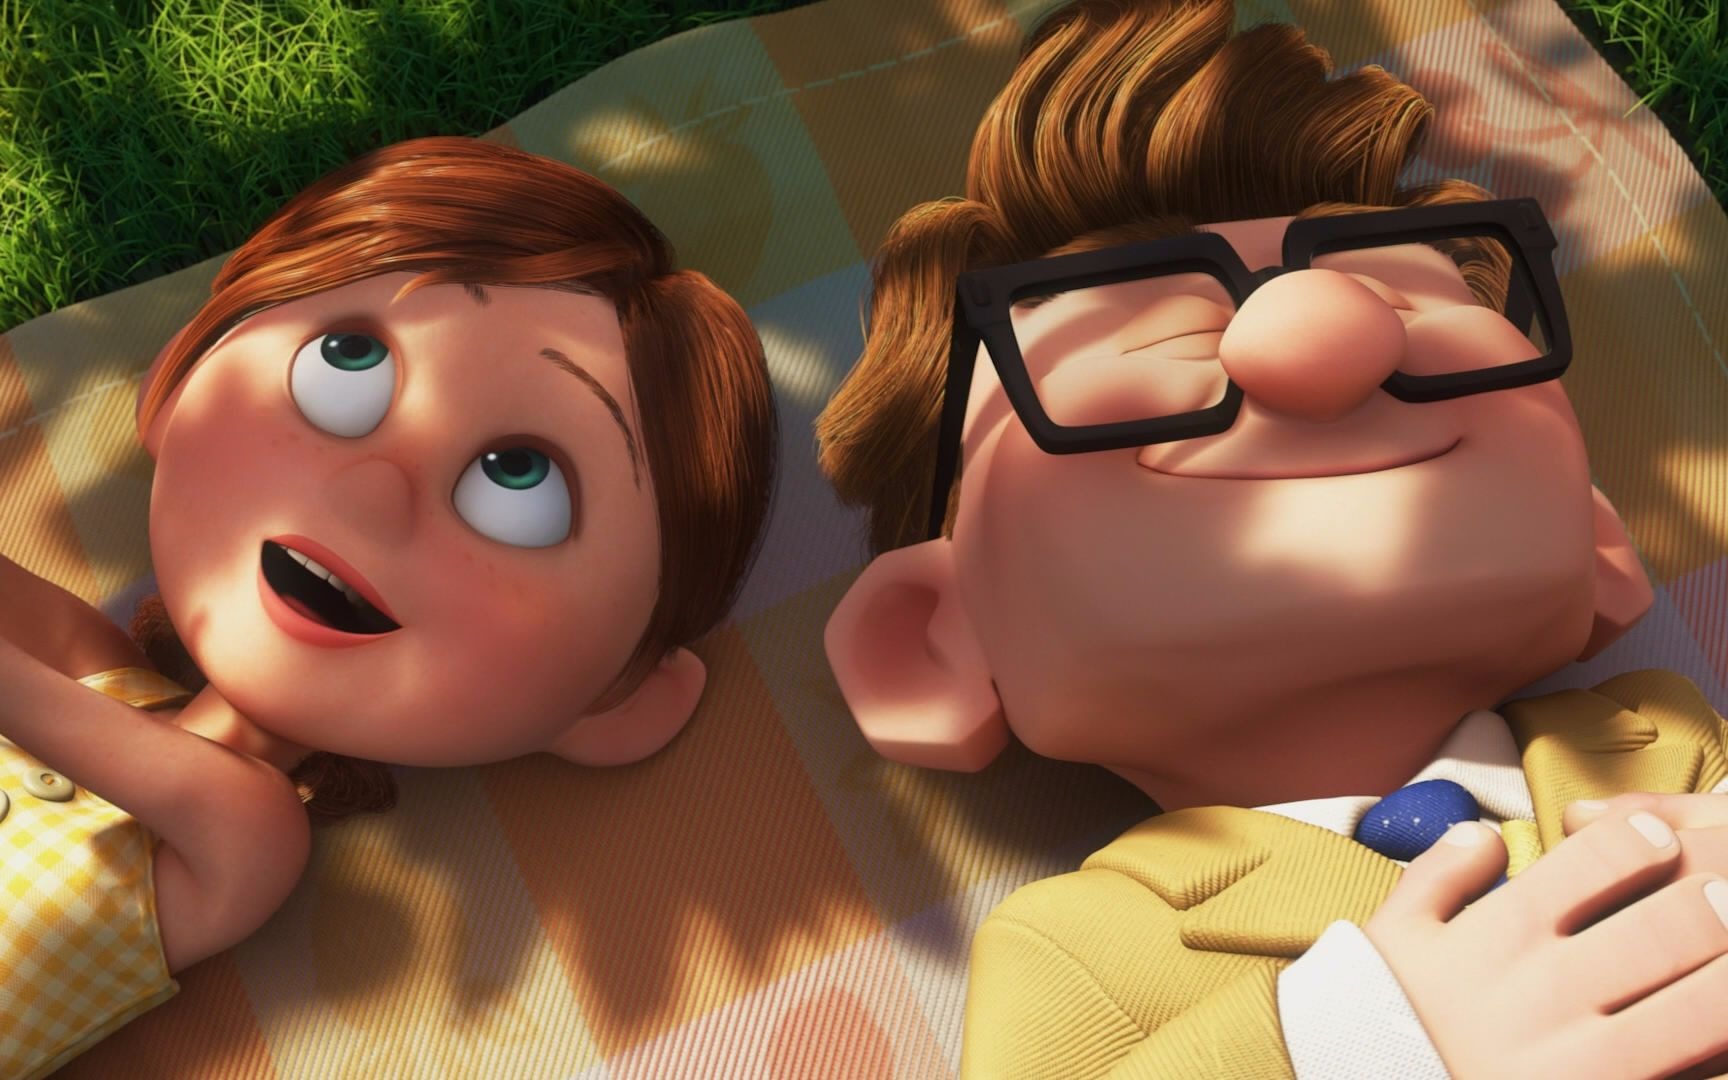 Couple from UP